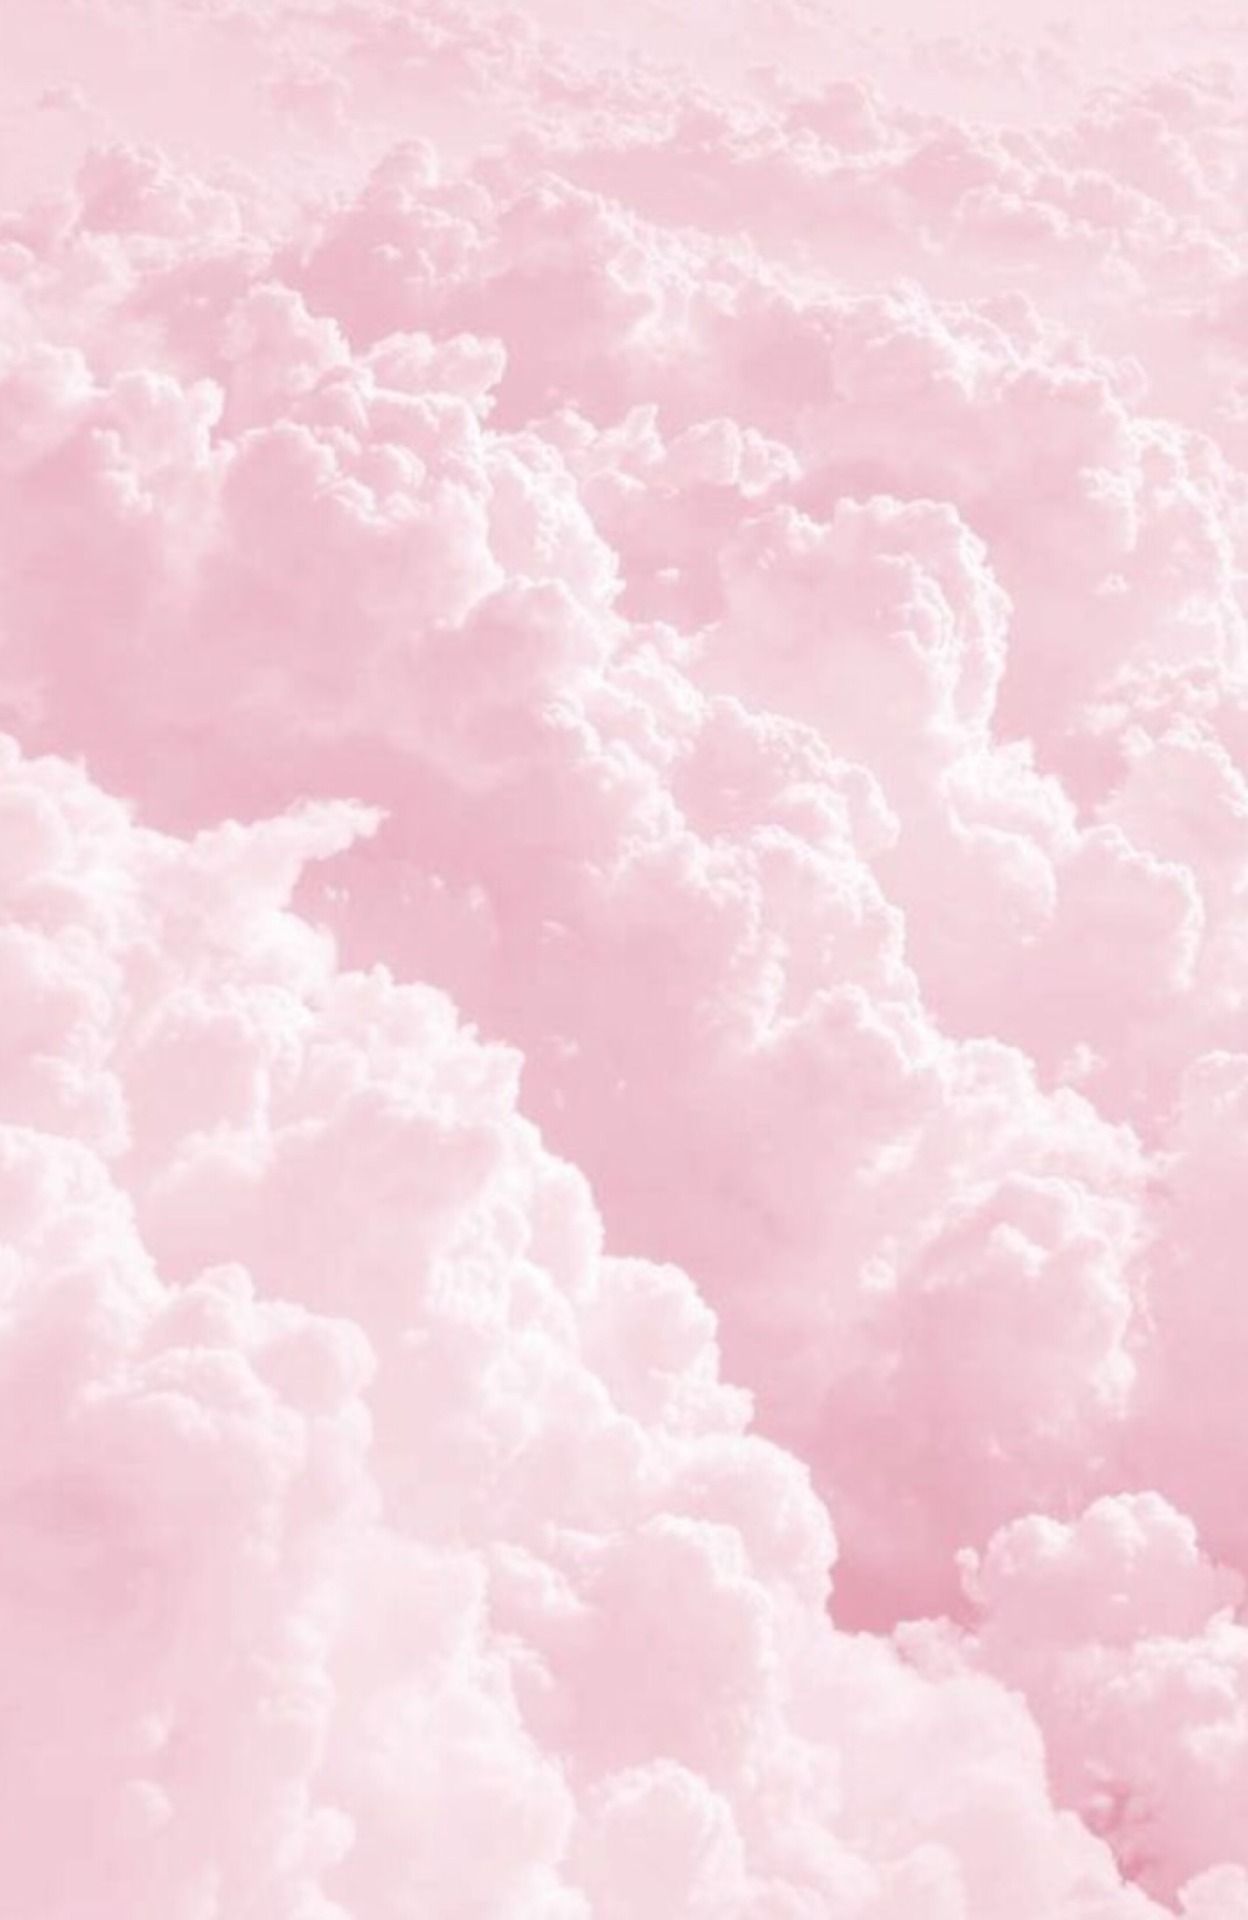 Aesthetic Pictures Pink Wallpapers